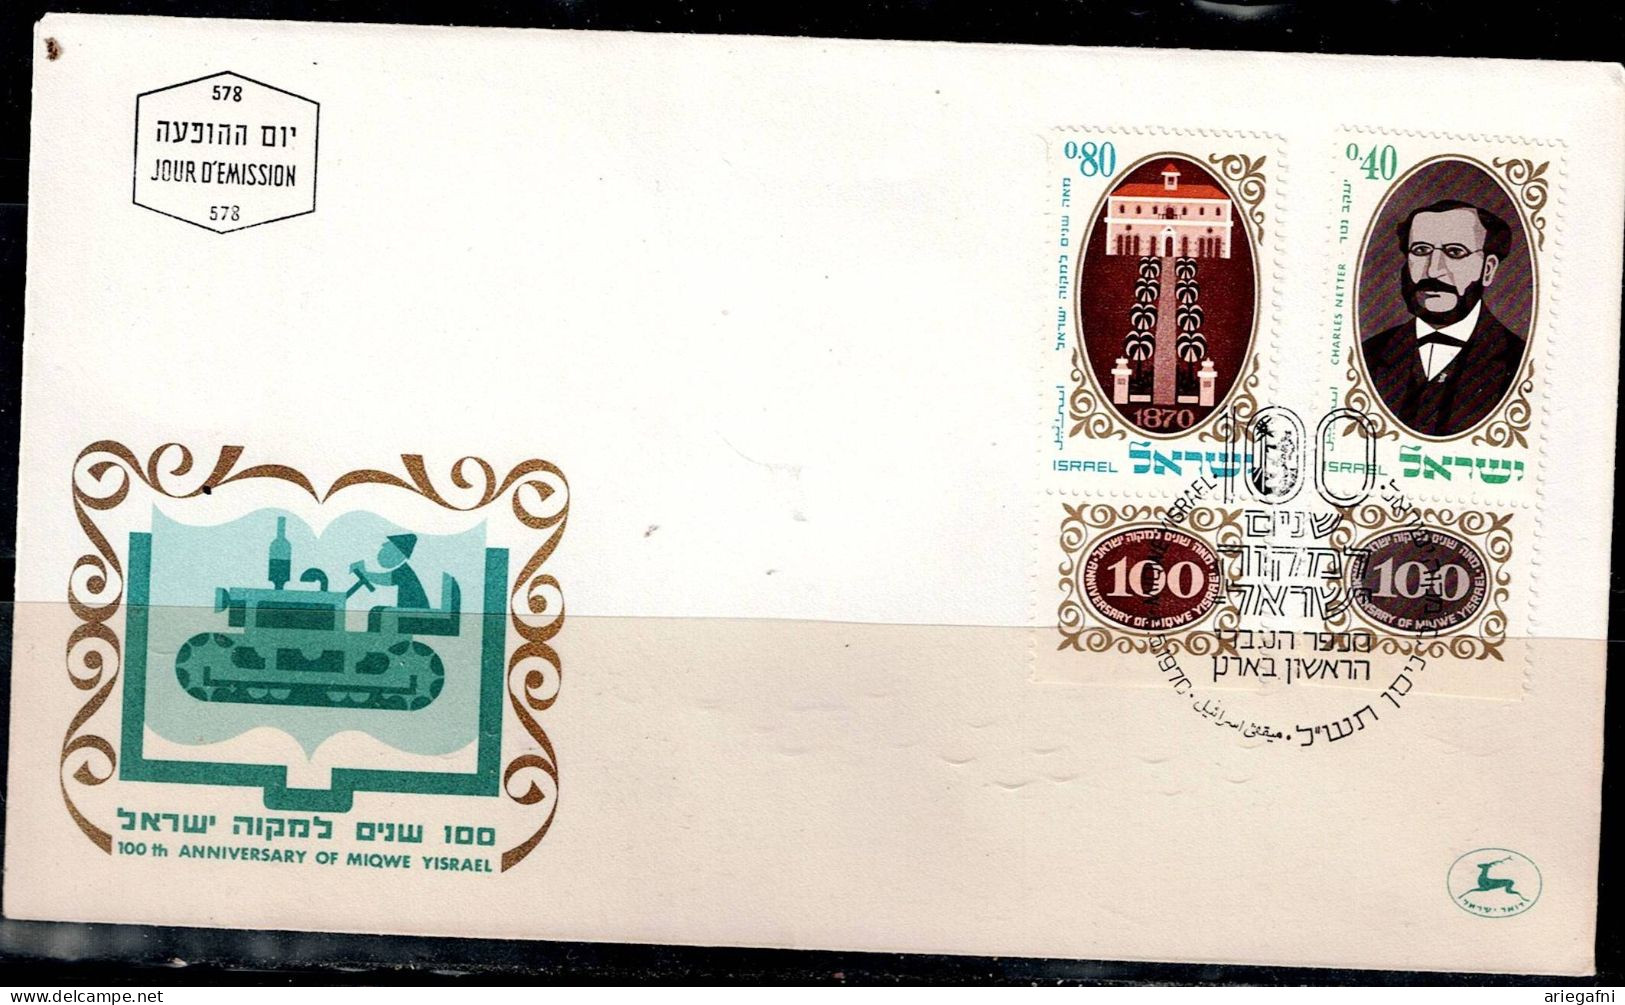 ISRAEL 1970 FDC CENTENARY OF MIKVE YISRAEL VF!! - FDC